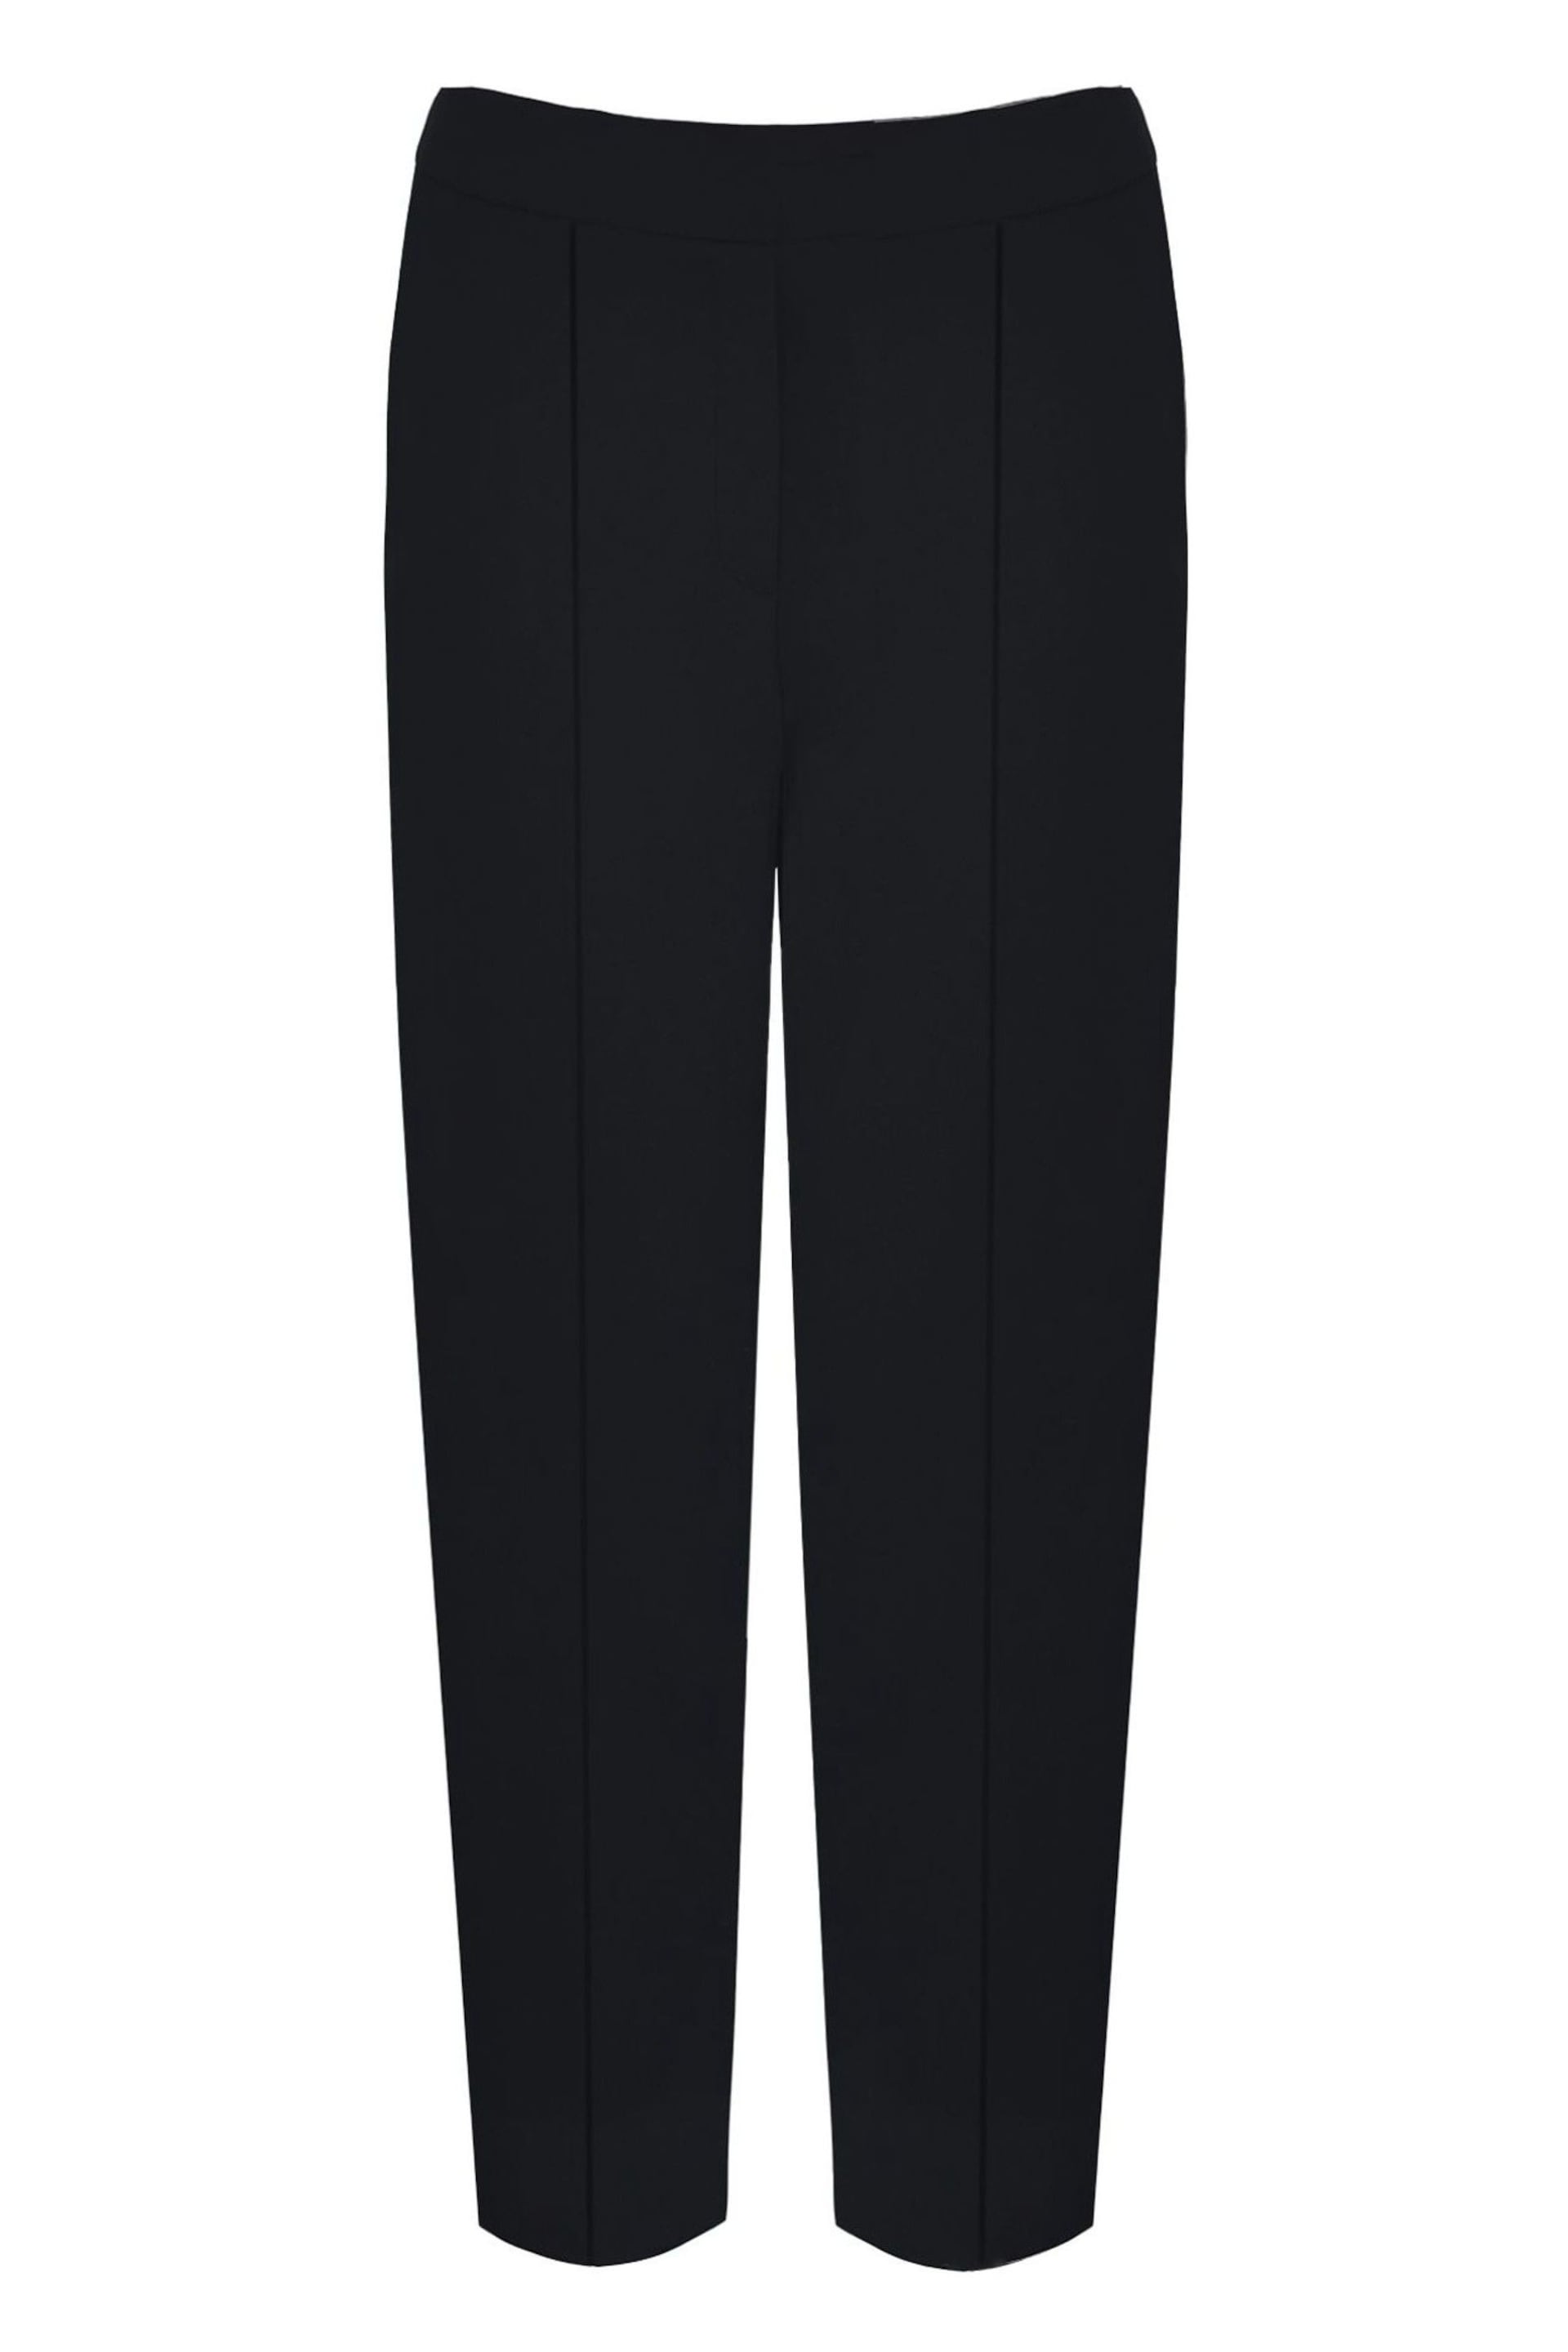 Live Unlimited Curve Stretch Tapered Regular Length Black Trousers - Image 4 of 4